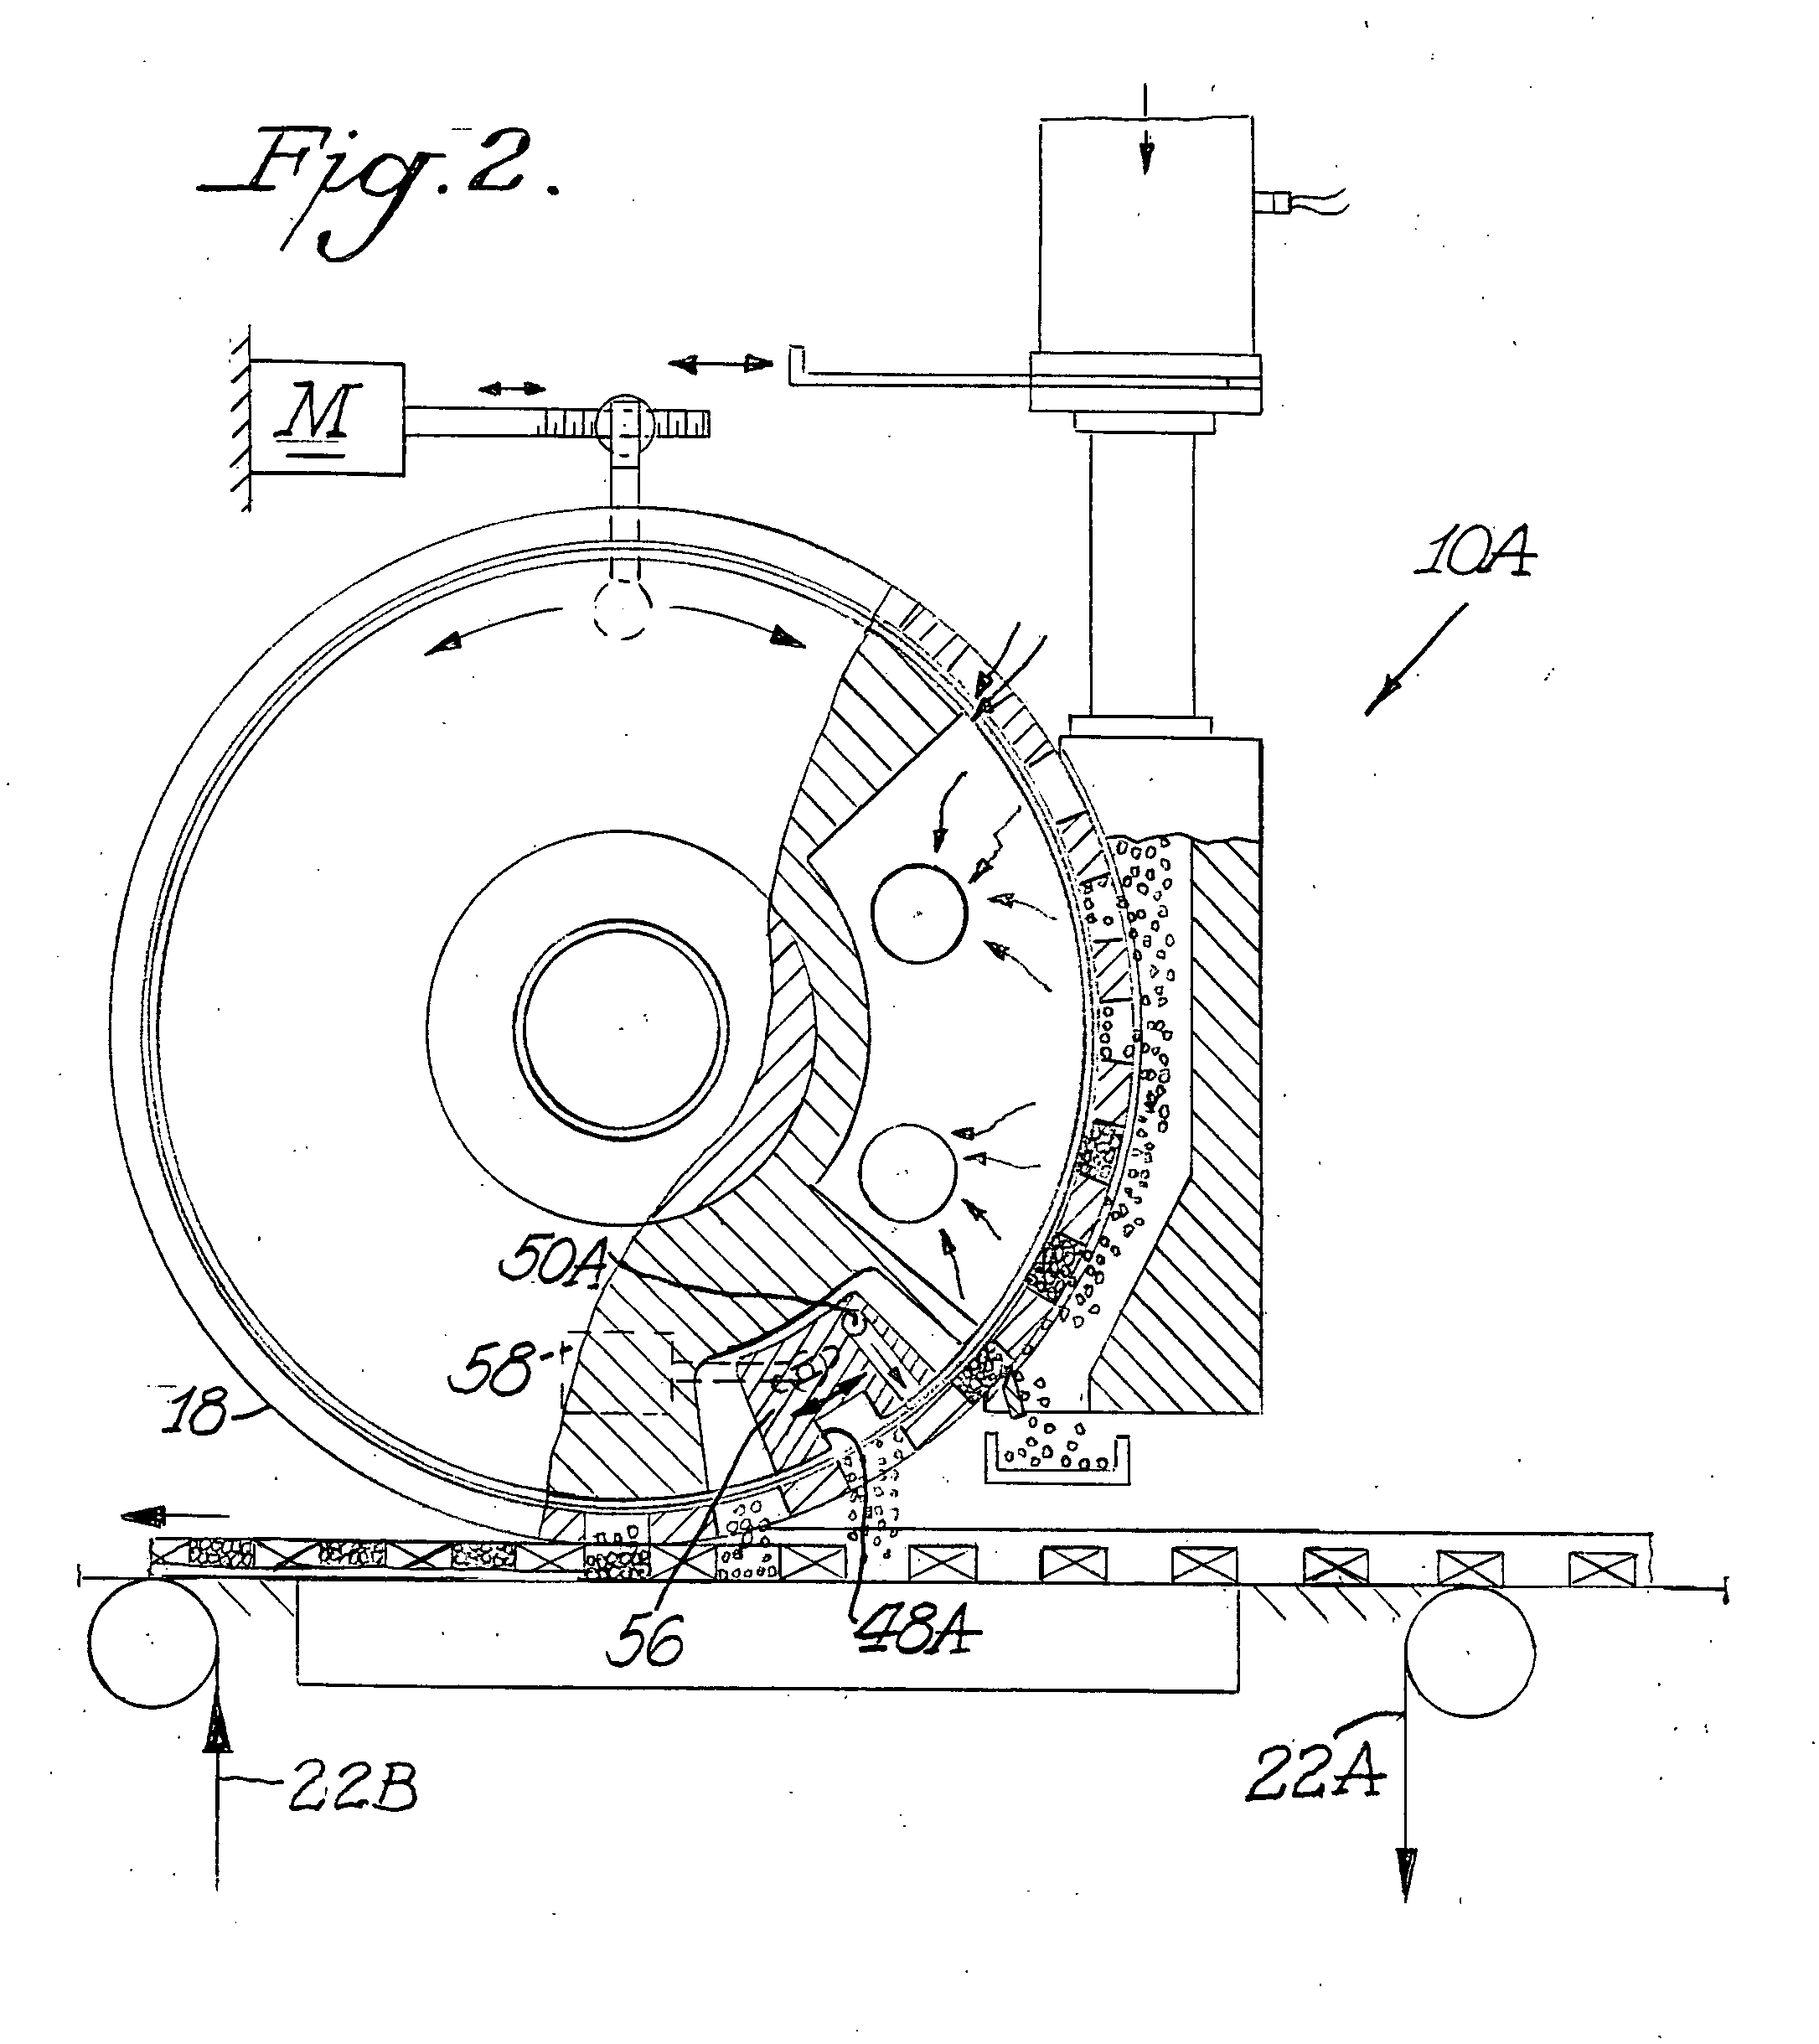 Applicator wheel for filling cavities with metered amounts of particulate material